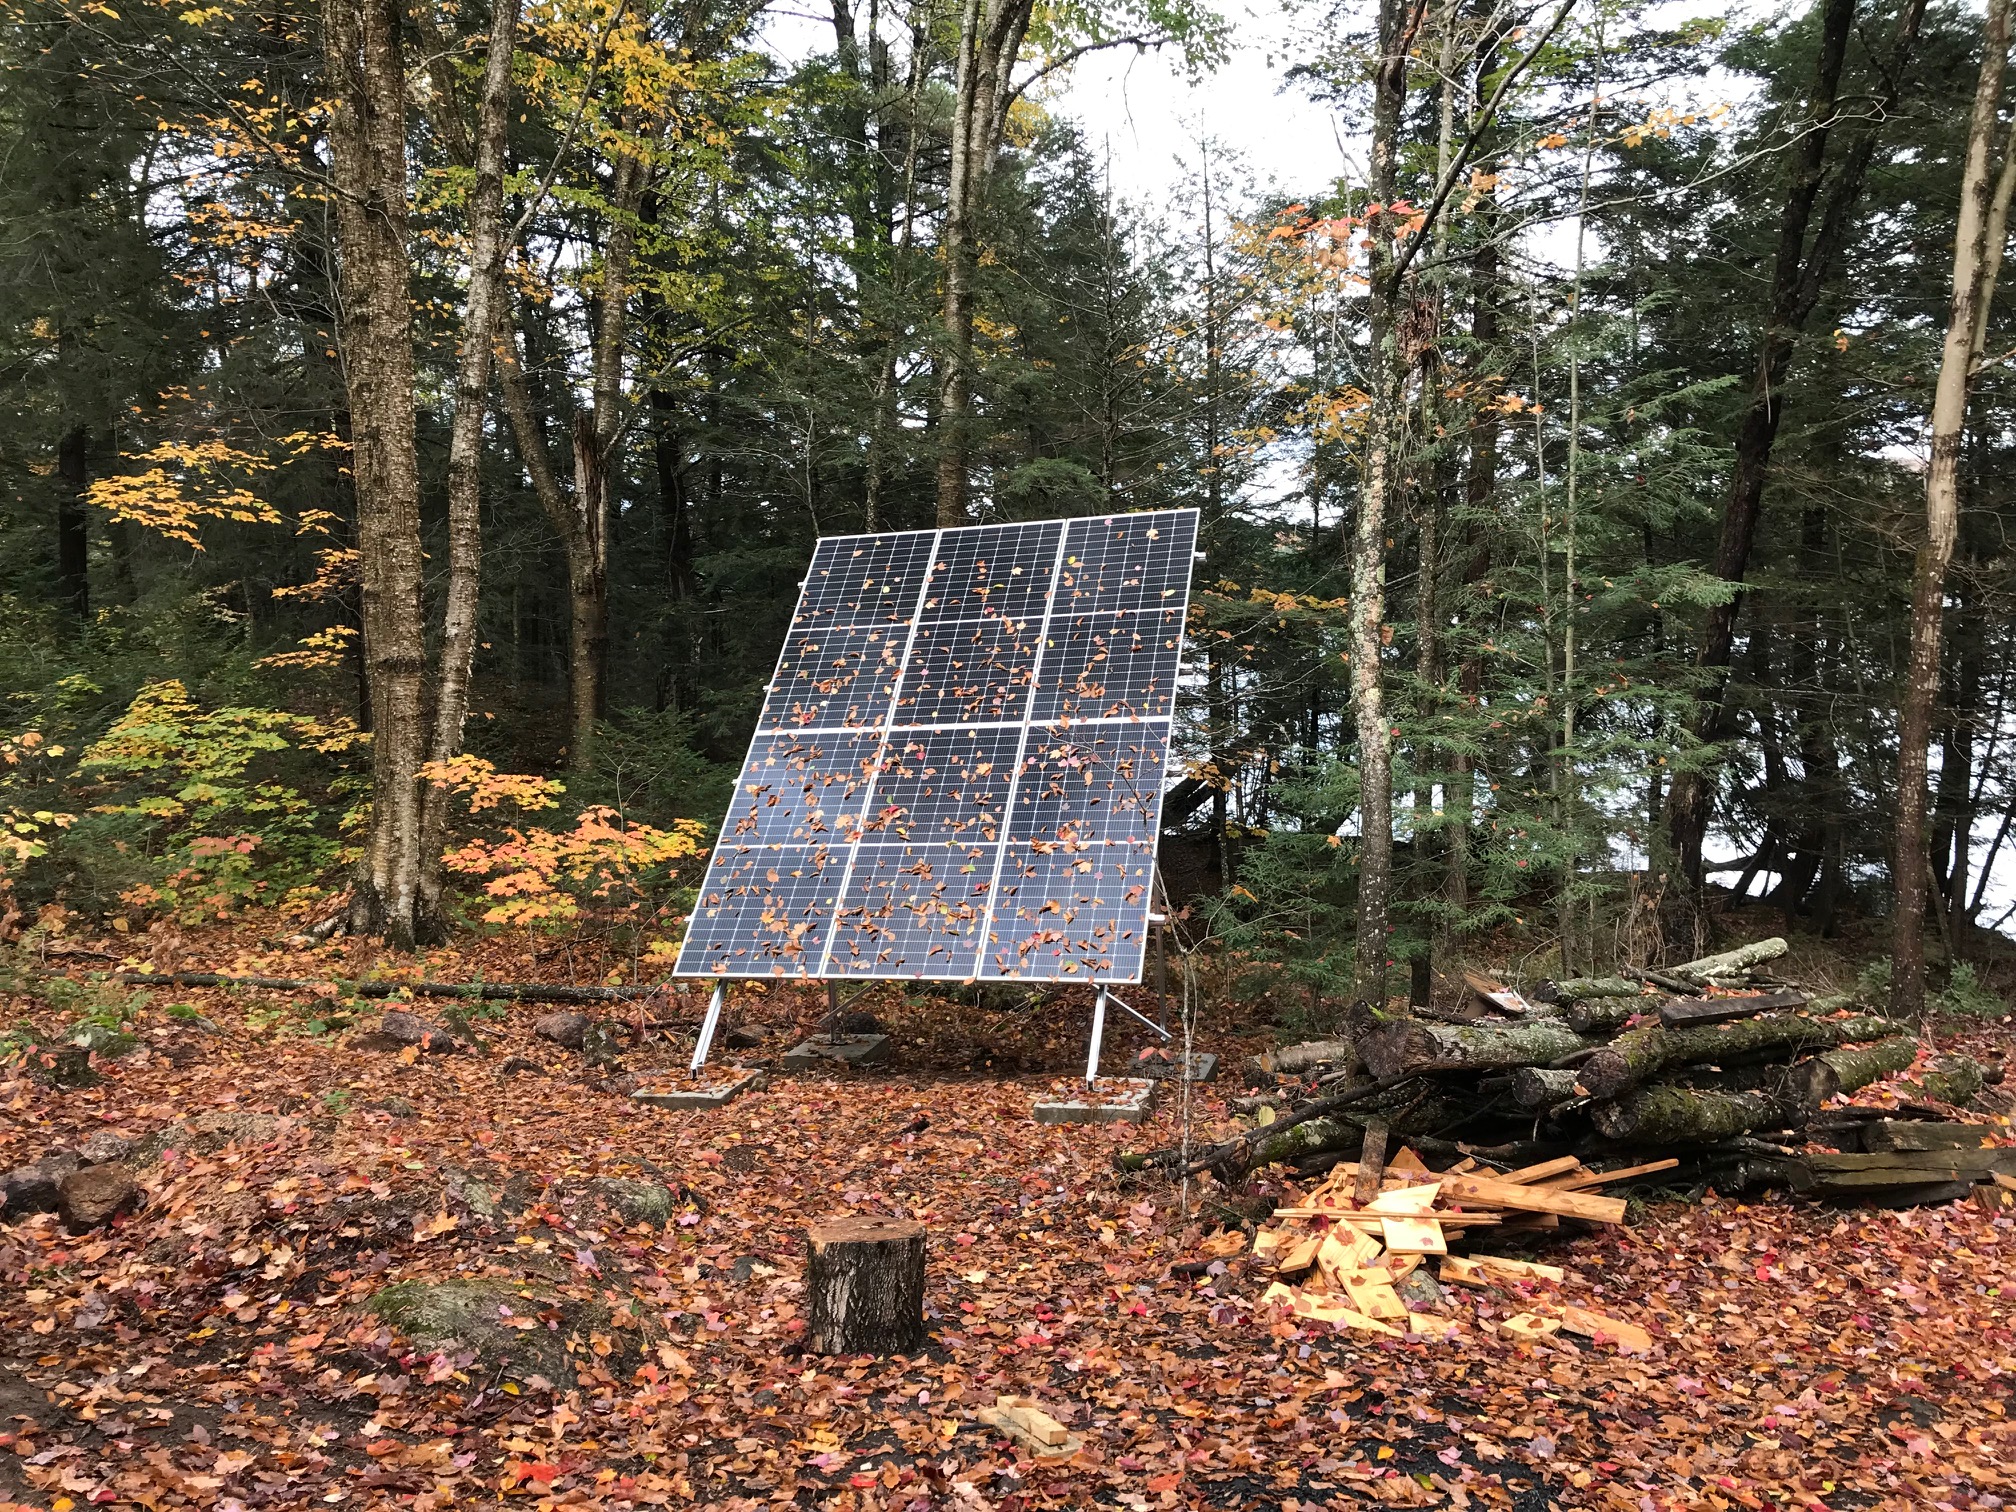 Big solar panels sit outdoors in a clearing of a wooded area..